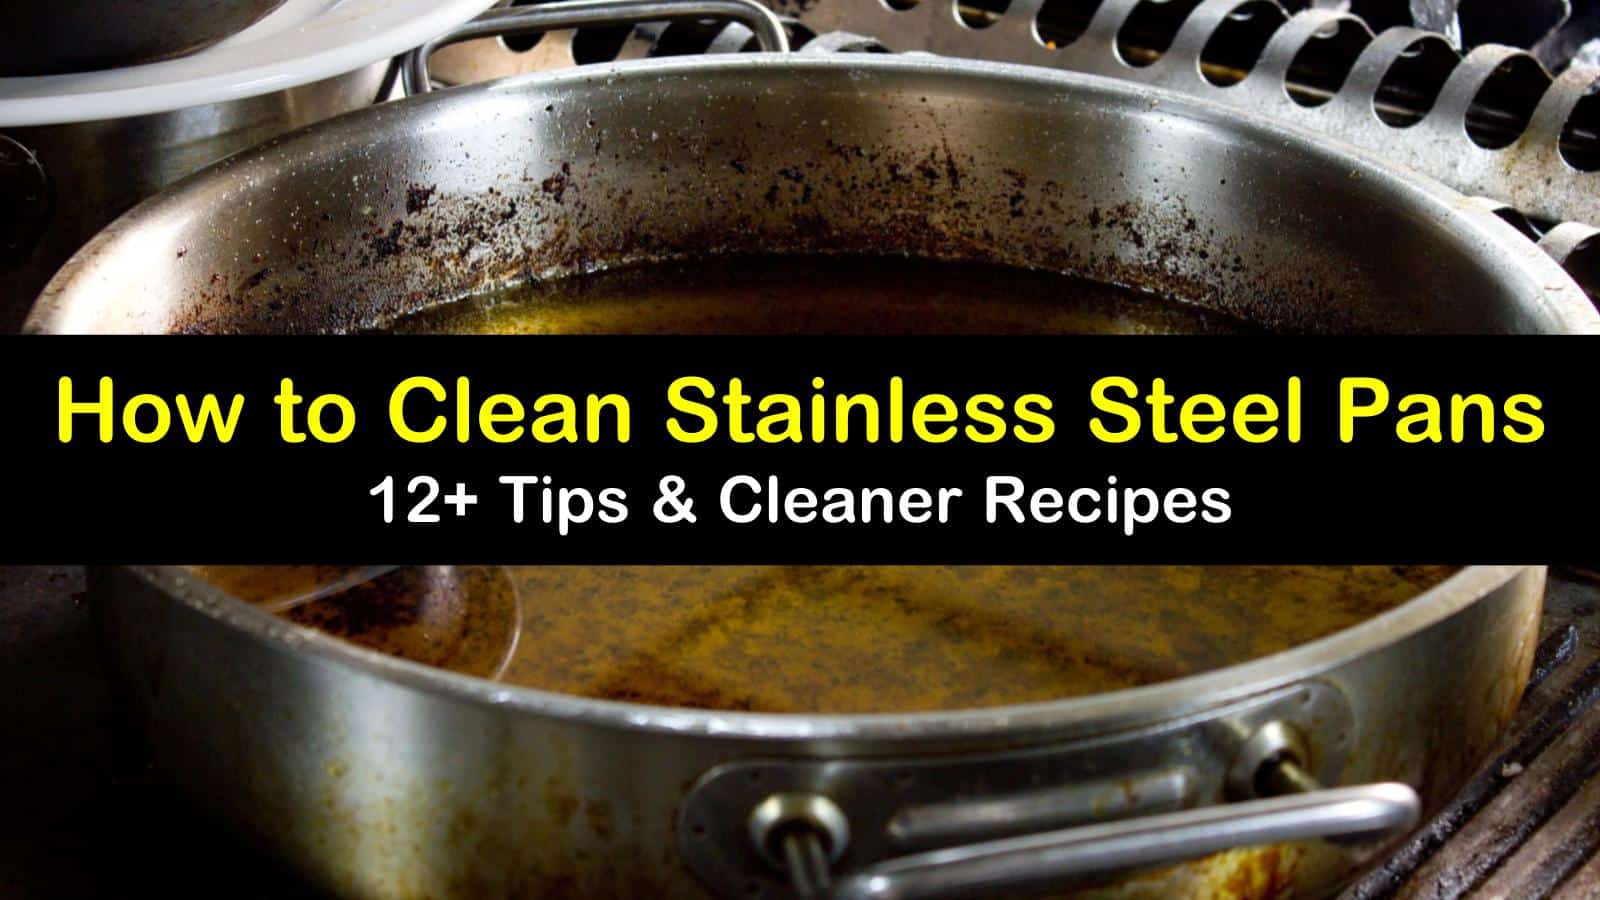 How to Clean Stainless Steel Pans - 12+ Tips & Cleaner Recipes Best Way To Clean Stainless Steel Pans